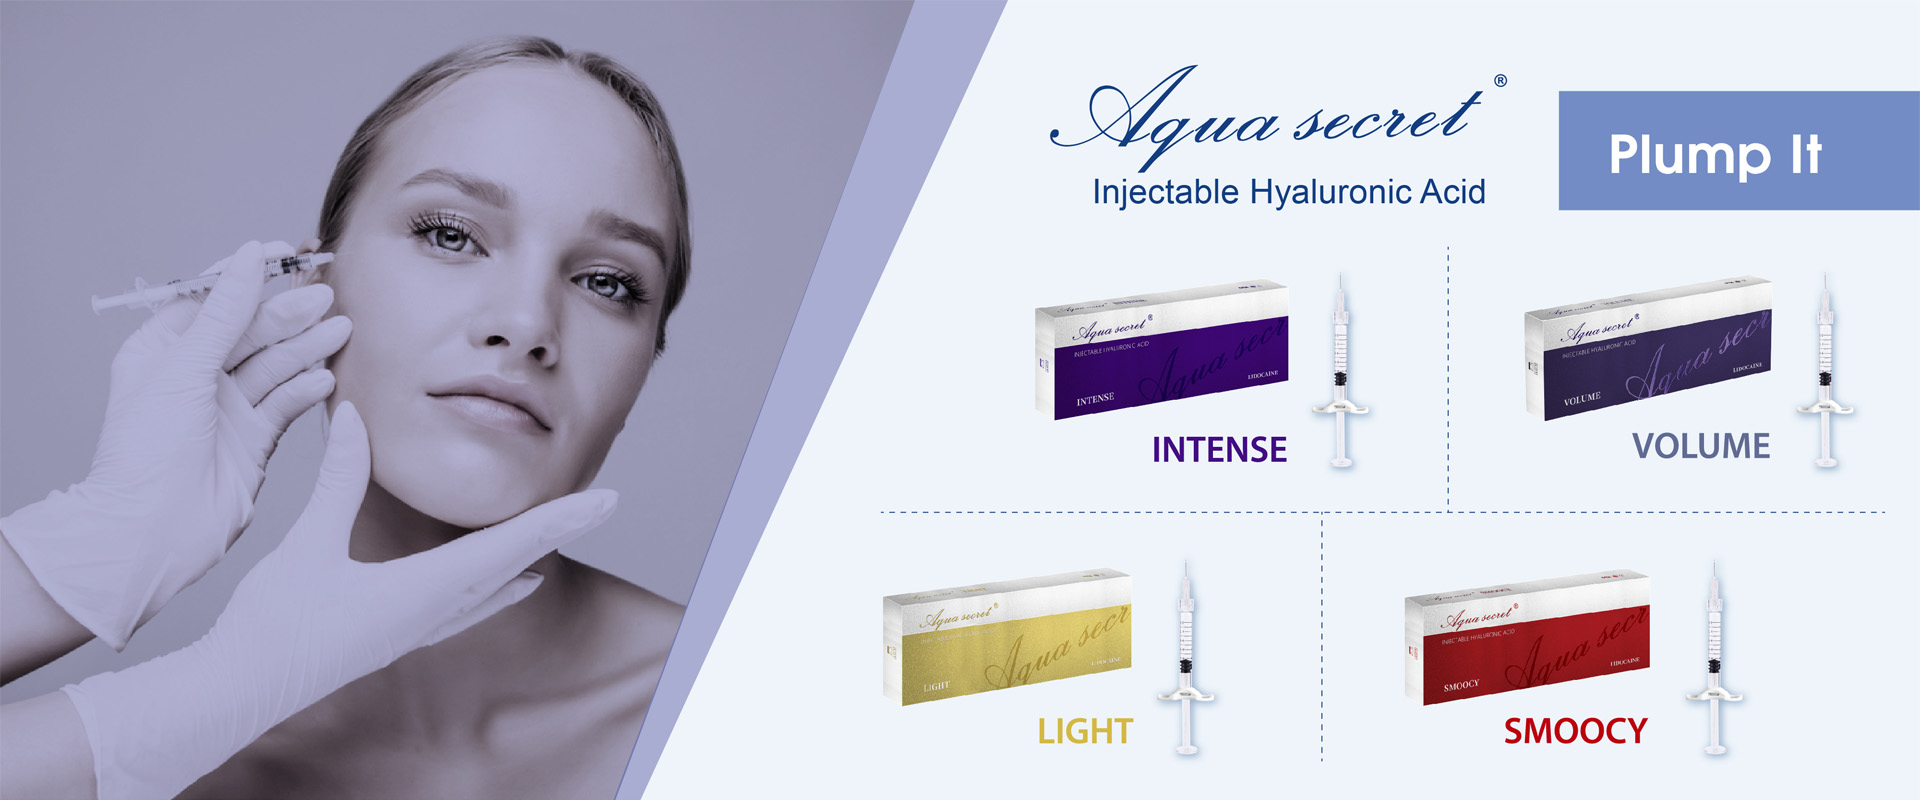 hyaluronic acid treatment knowledge sharing